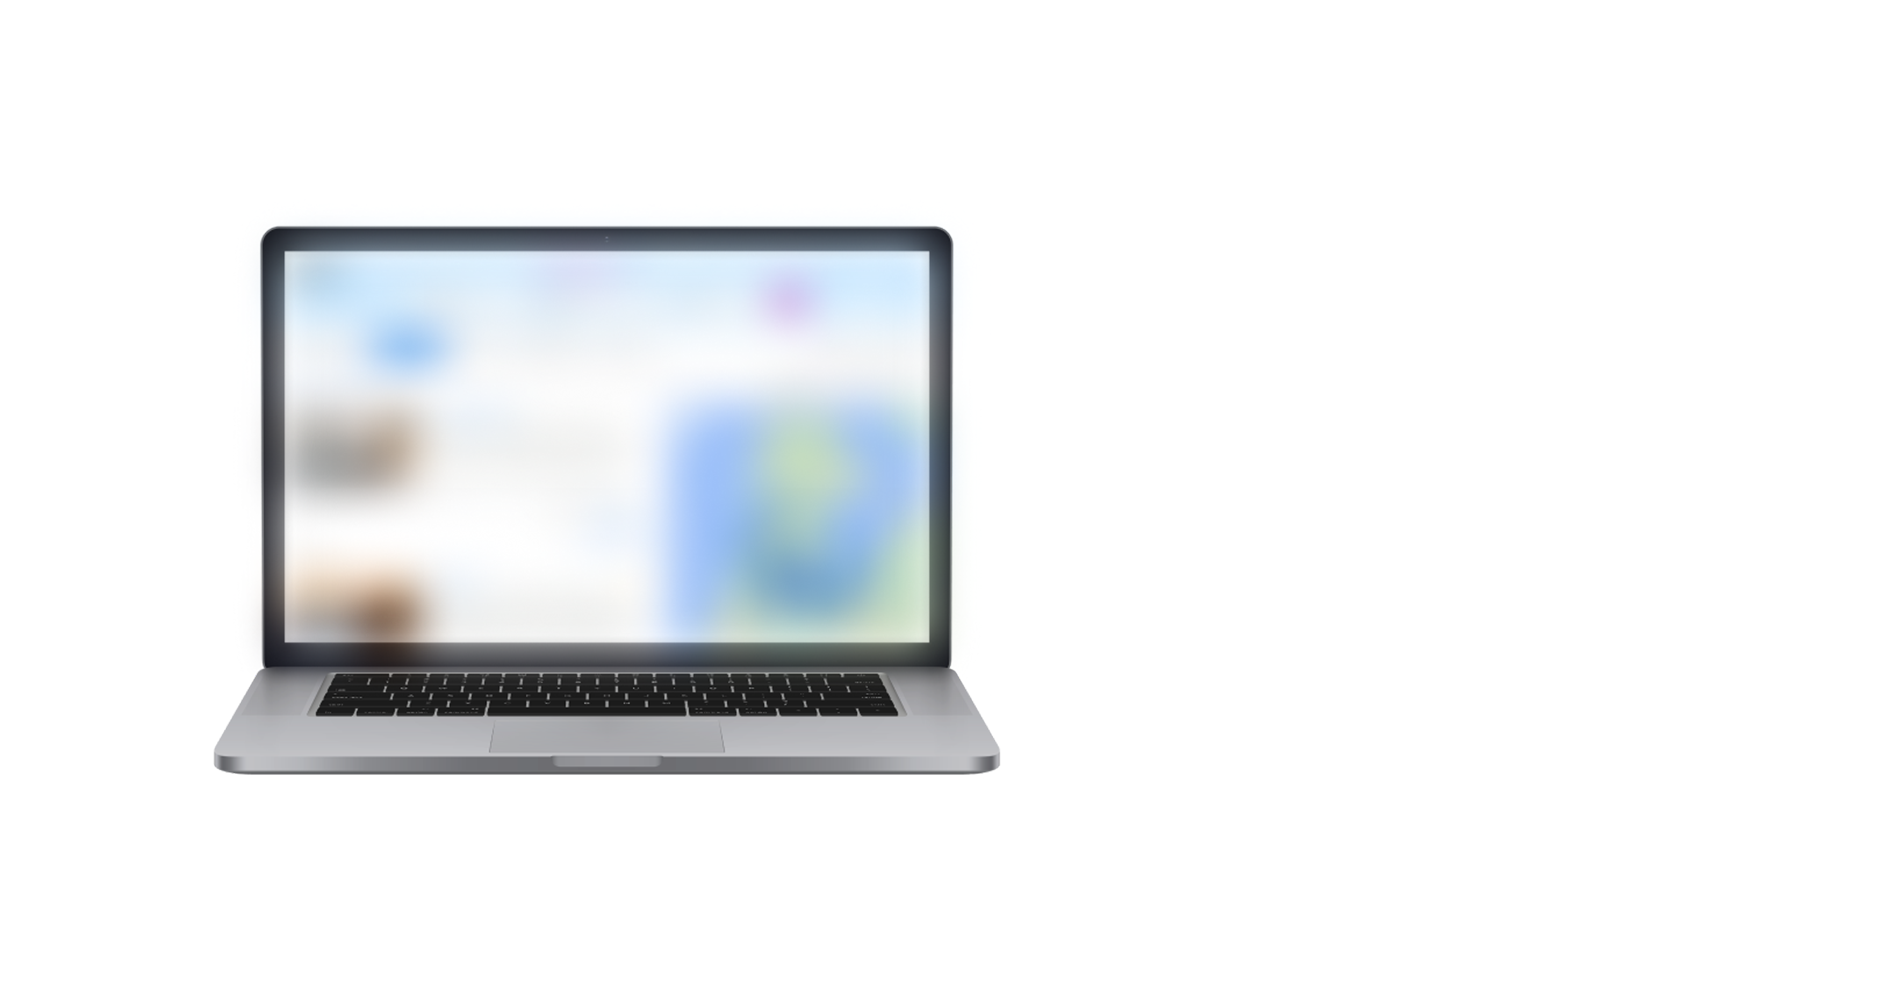 Laptop Blurred New Search Landing page